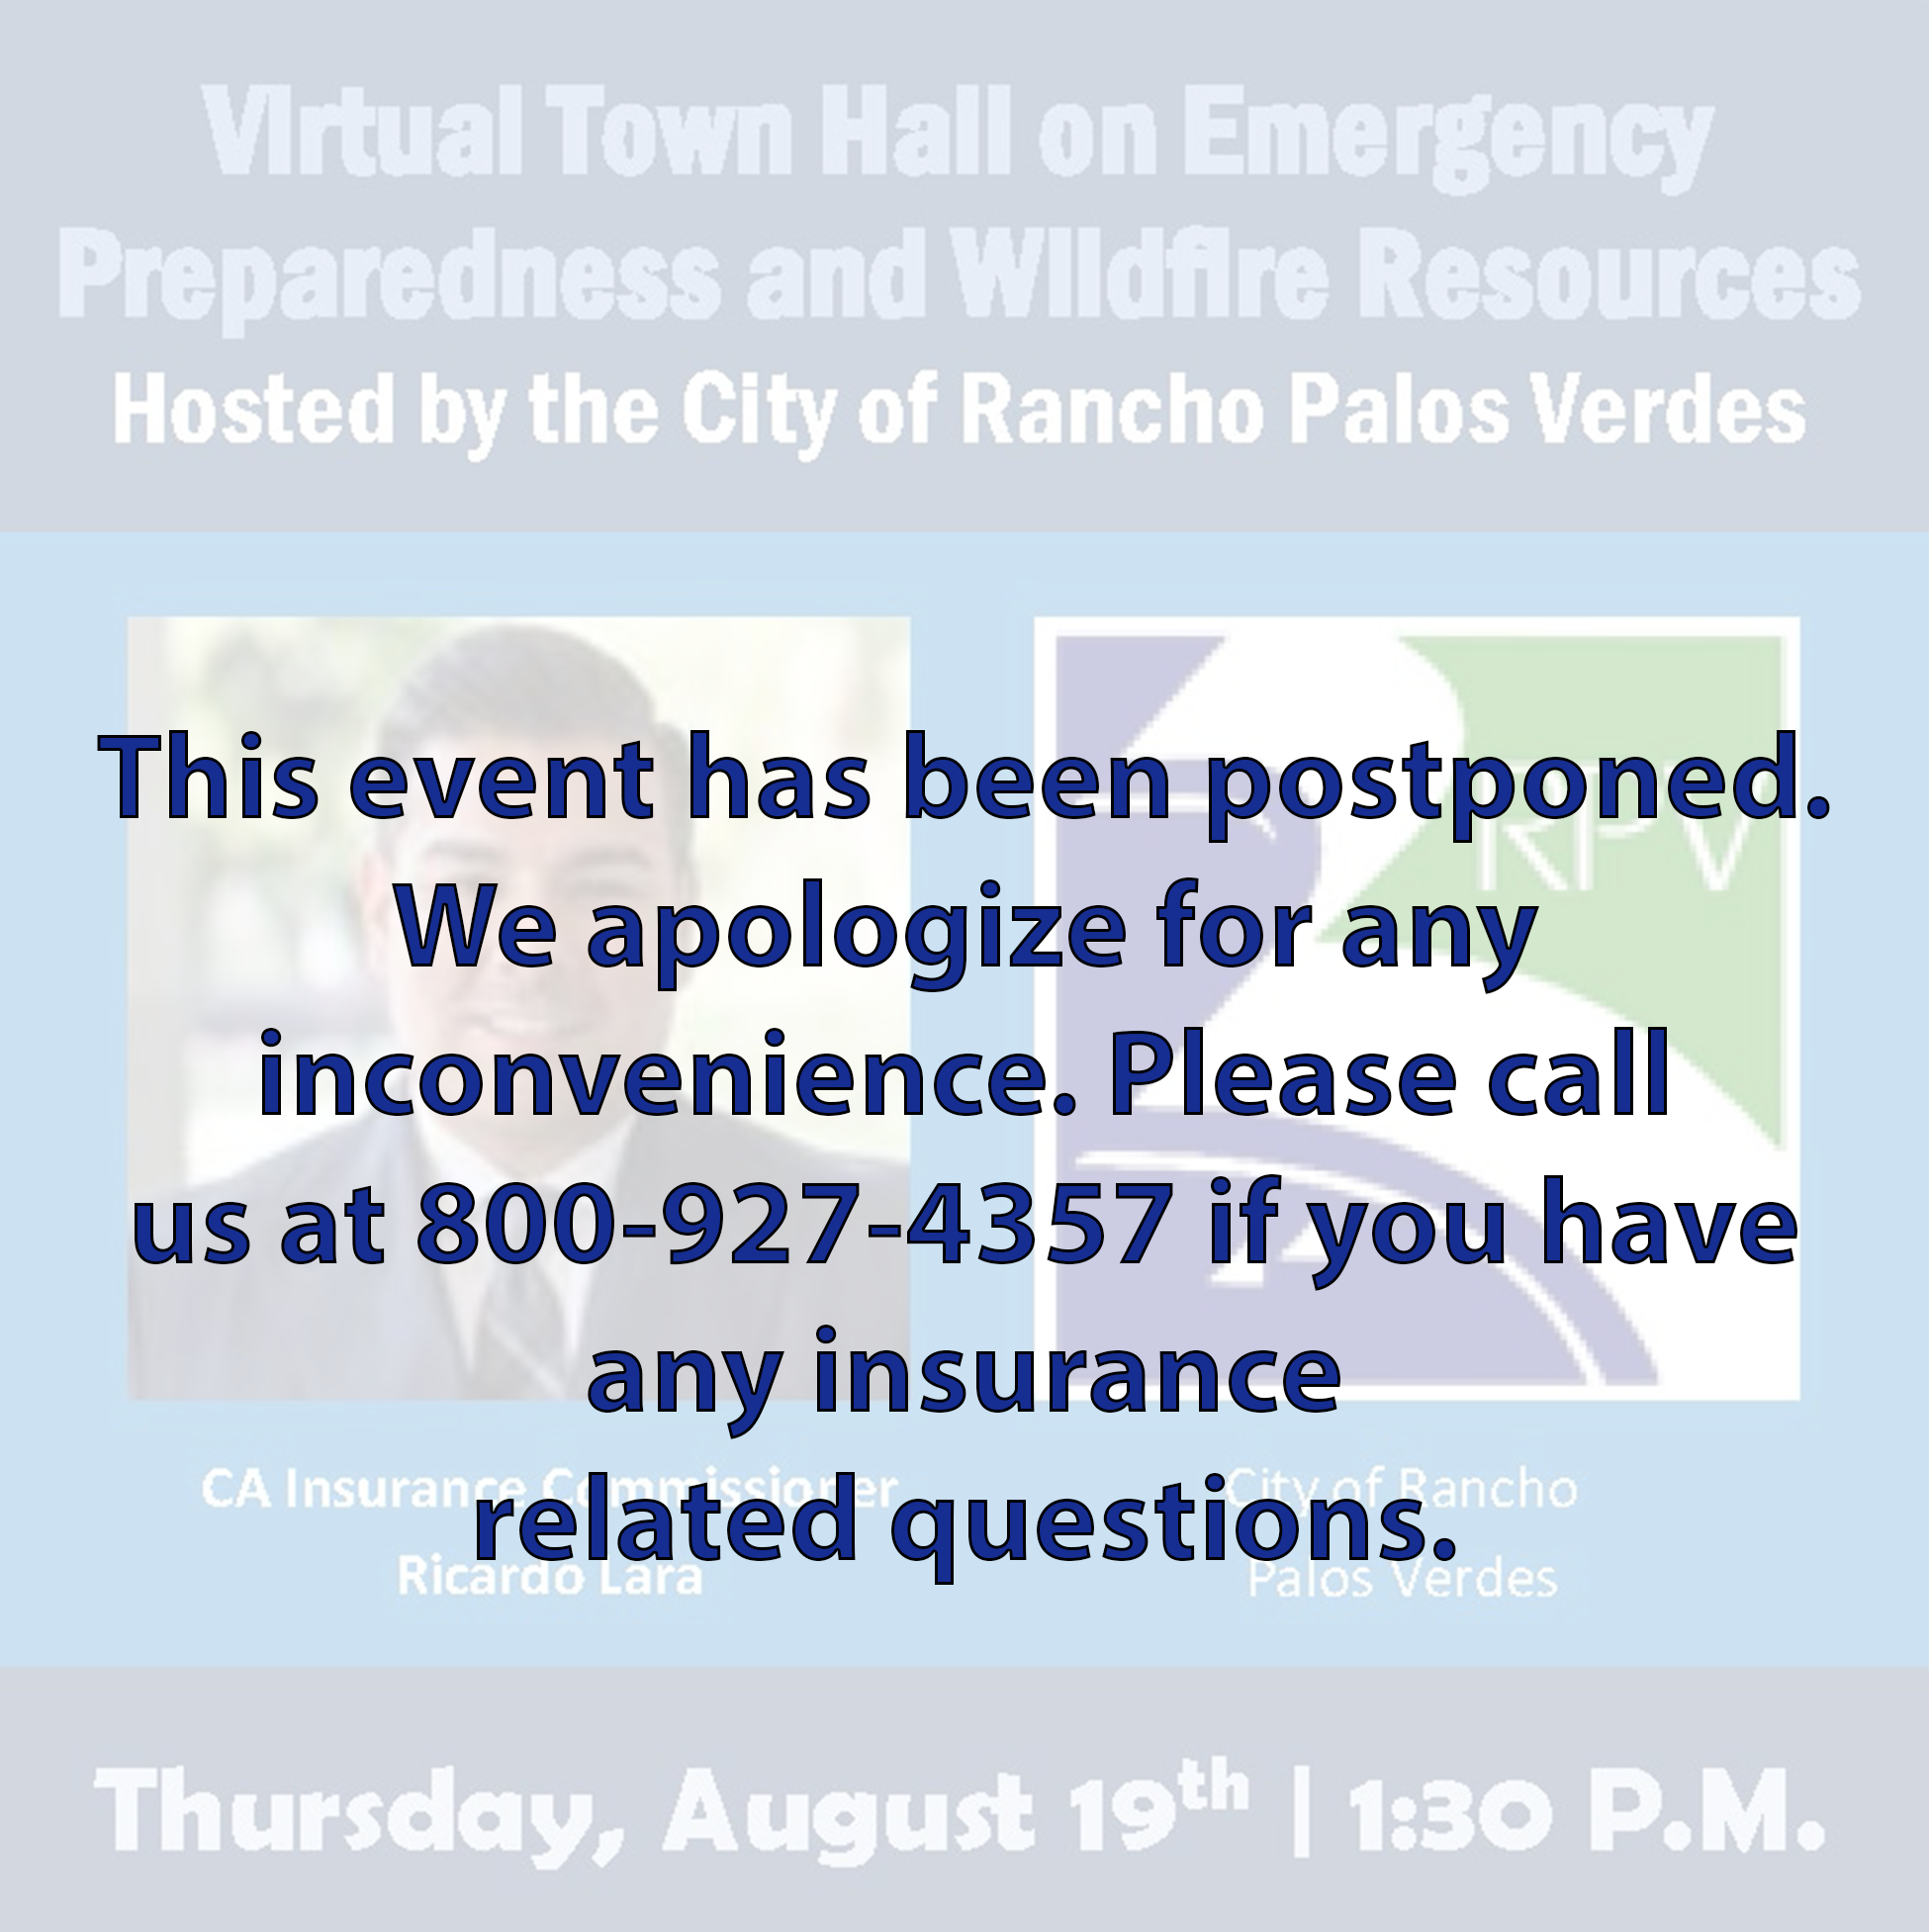 This event has been postponed. We apologize for any inconvenience. Please call us at 800-927-4357 if you have any questions. 